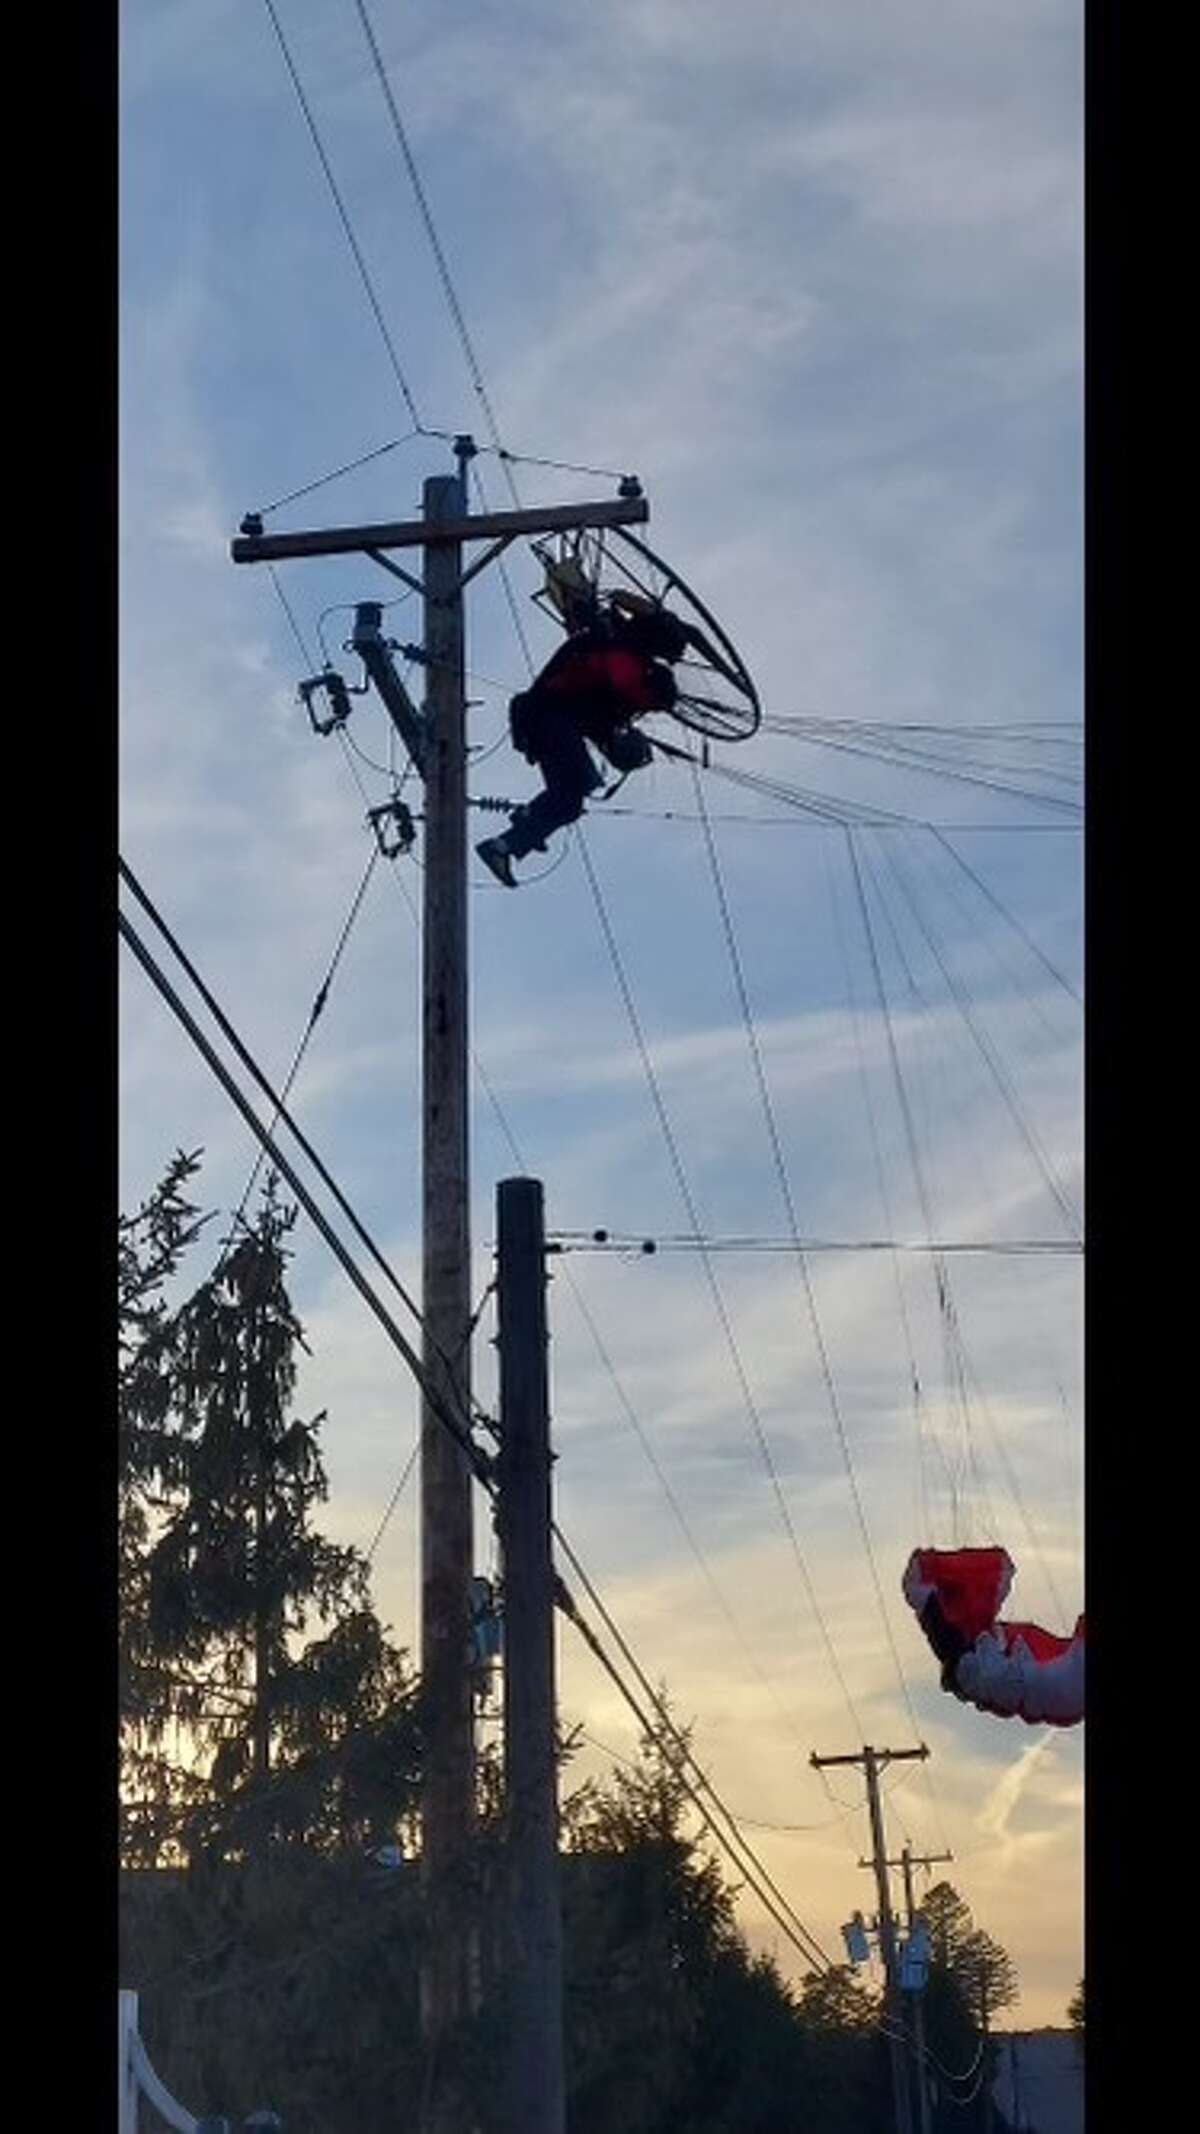 A person flying an alternative craft was trapped in power lines outside Indian Ladder Farms on Oct. 11, 2021.